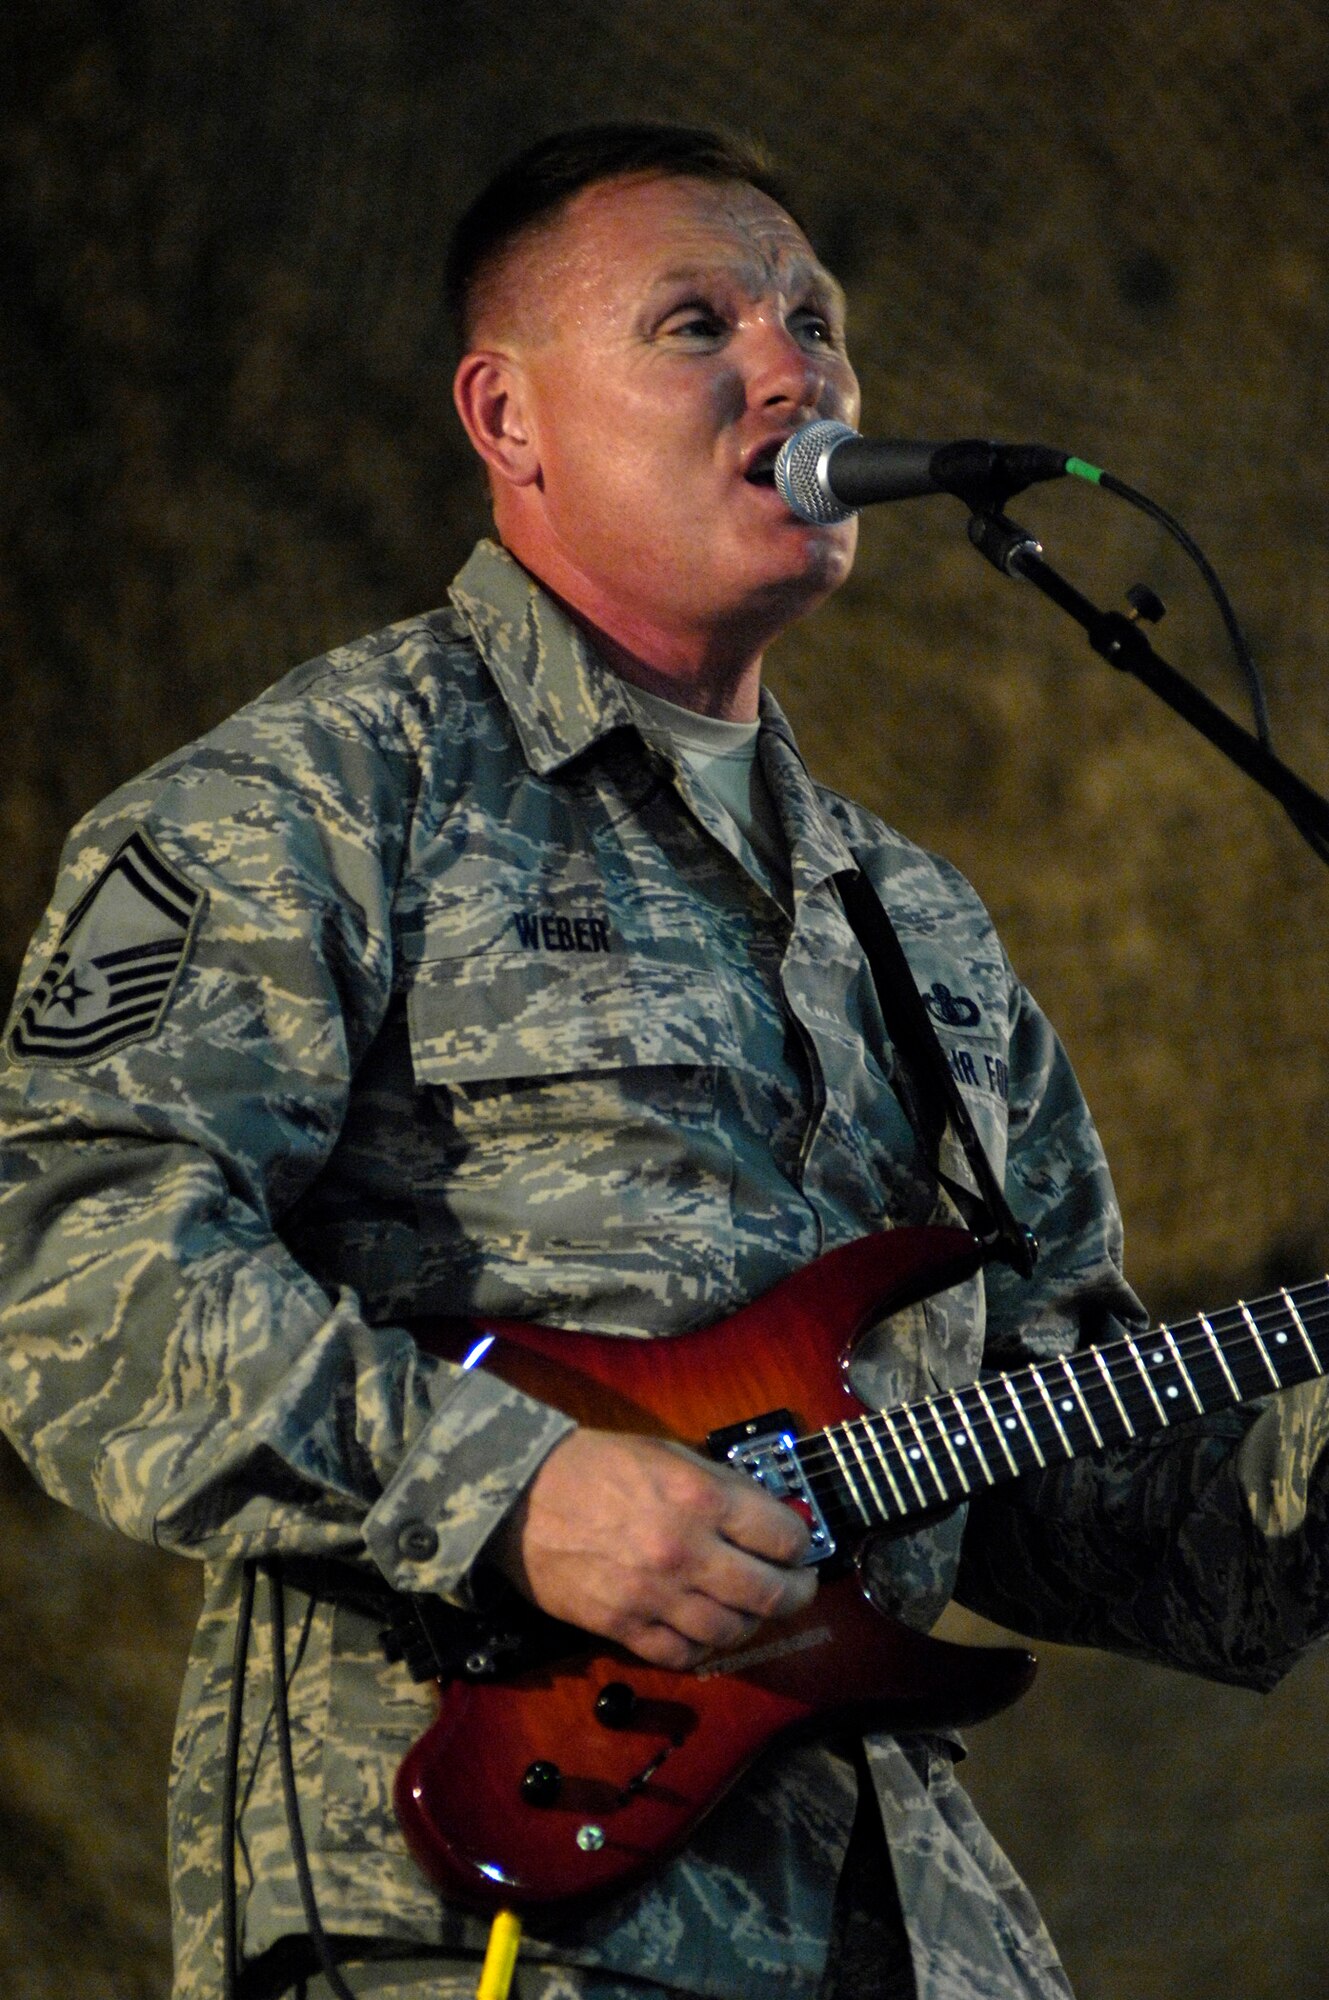 BAGRAM AIR FIELD, Afghanistan – Senior Master Sgt. James Weber, U.S. Air Forces Band ‘Falcon’ vocalist and guitarist, sings during a show here June 22.  ‘Falcon’ travels throughout the area of responsibility positively promoting troop morale, diplomacy and reach out to host nation communities.  (U.S. Air Force photo by Master Sgt. Demetrius Lester)